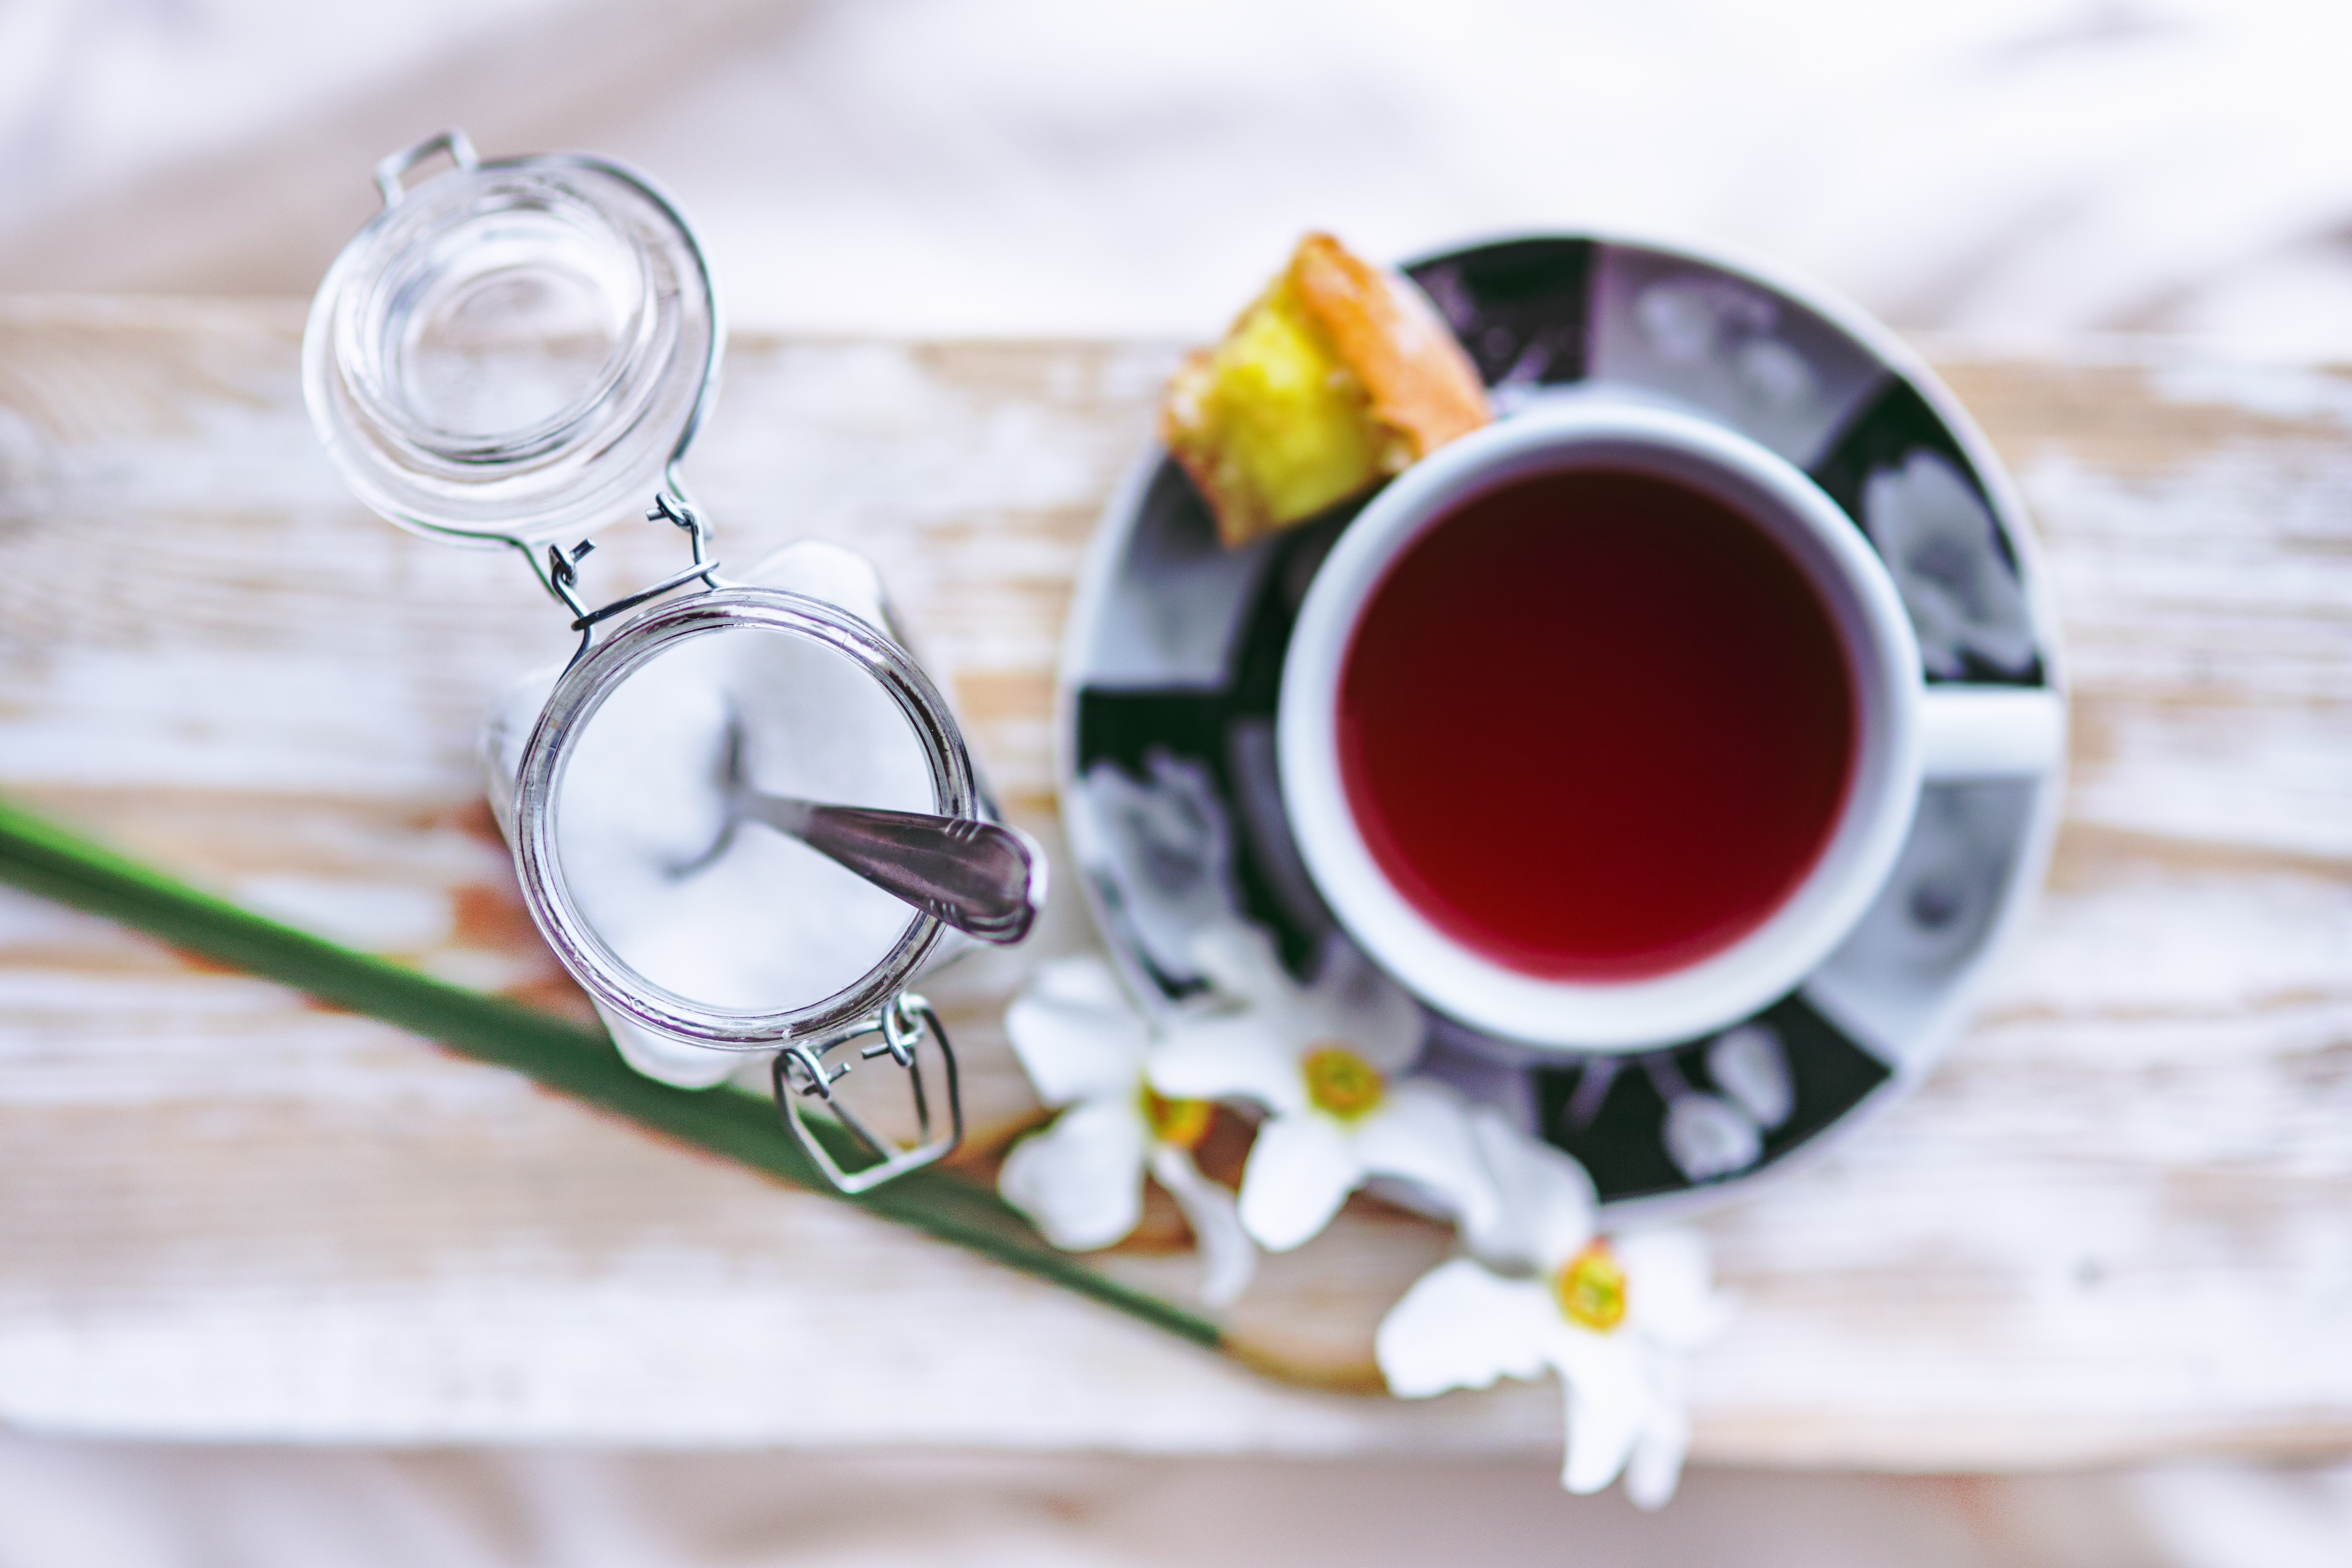 shallow focus photography of sugar with spoon and red liquid filled white mug